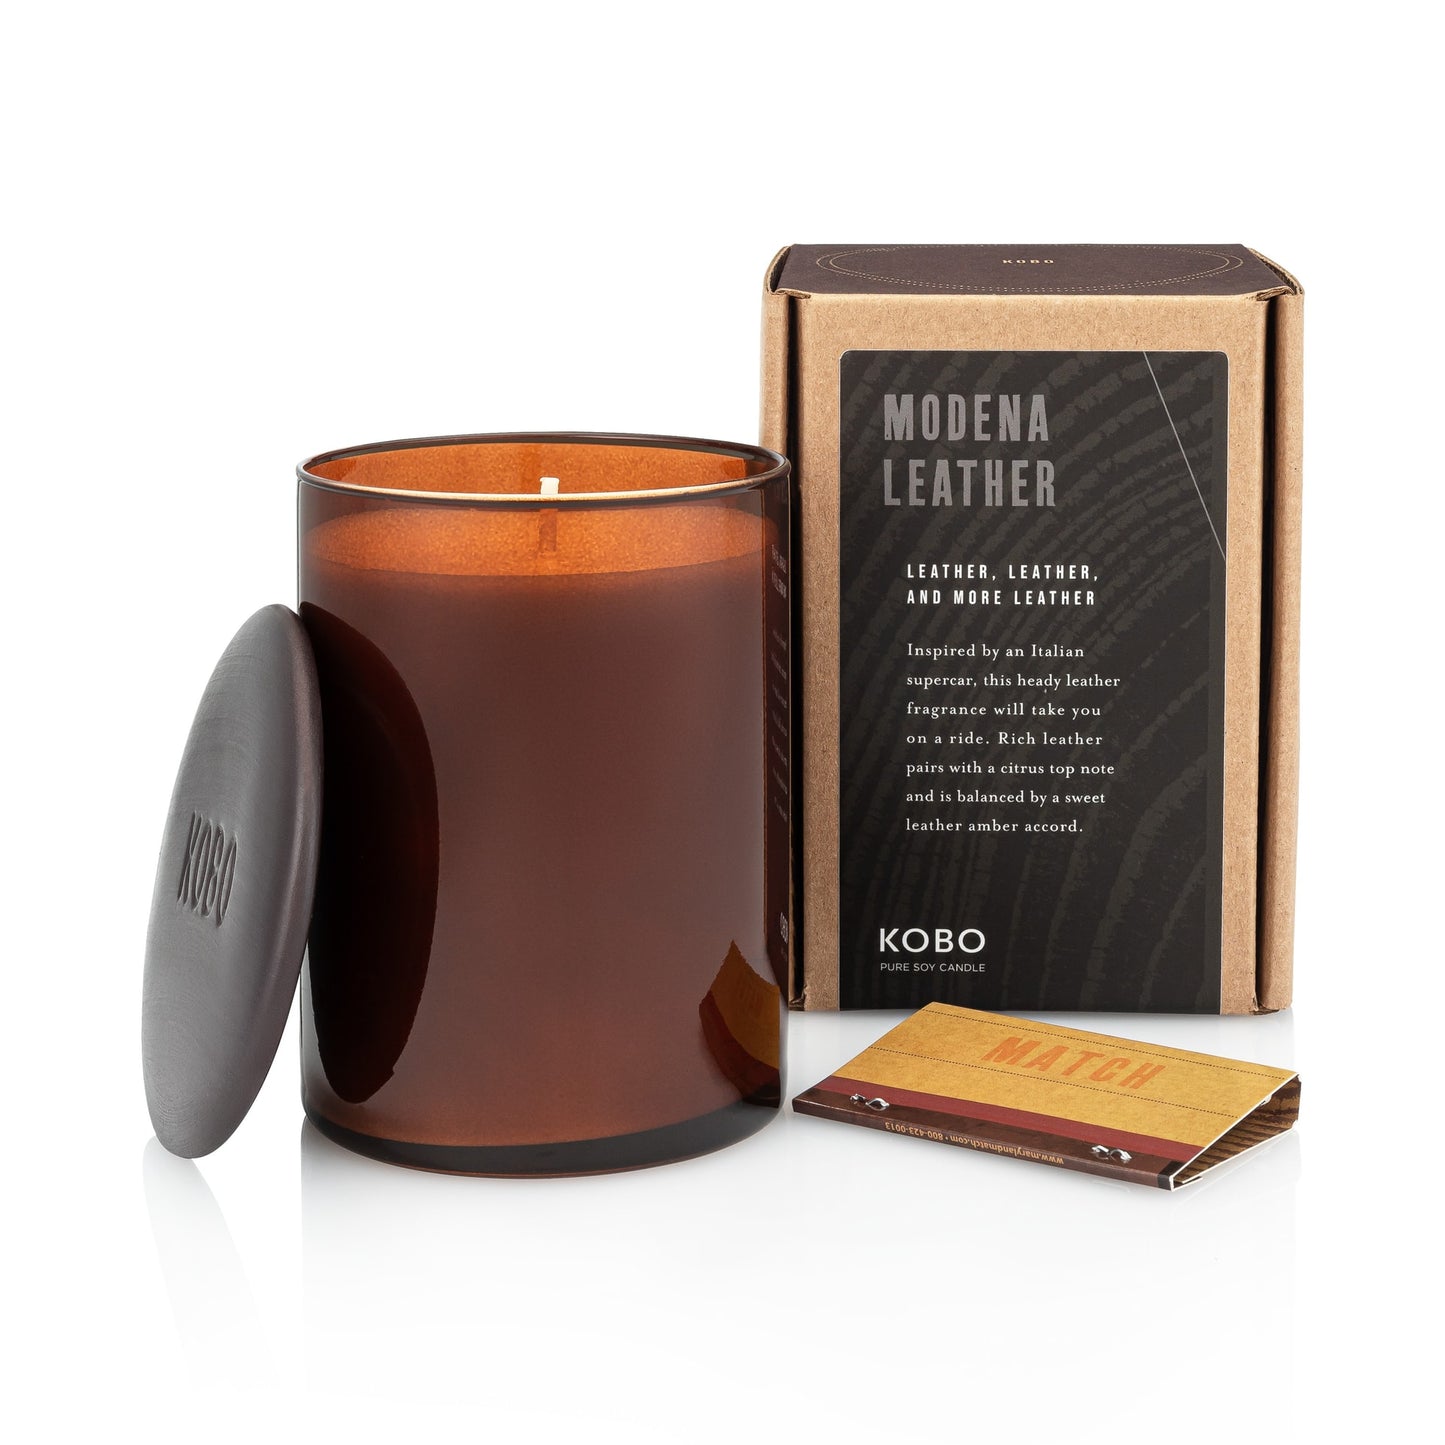 Primary Image of Modena Leather Woodblock Candle